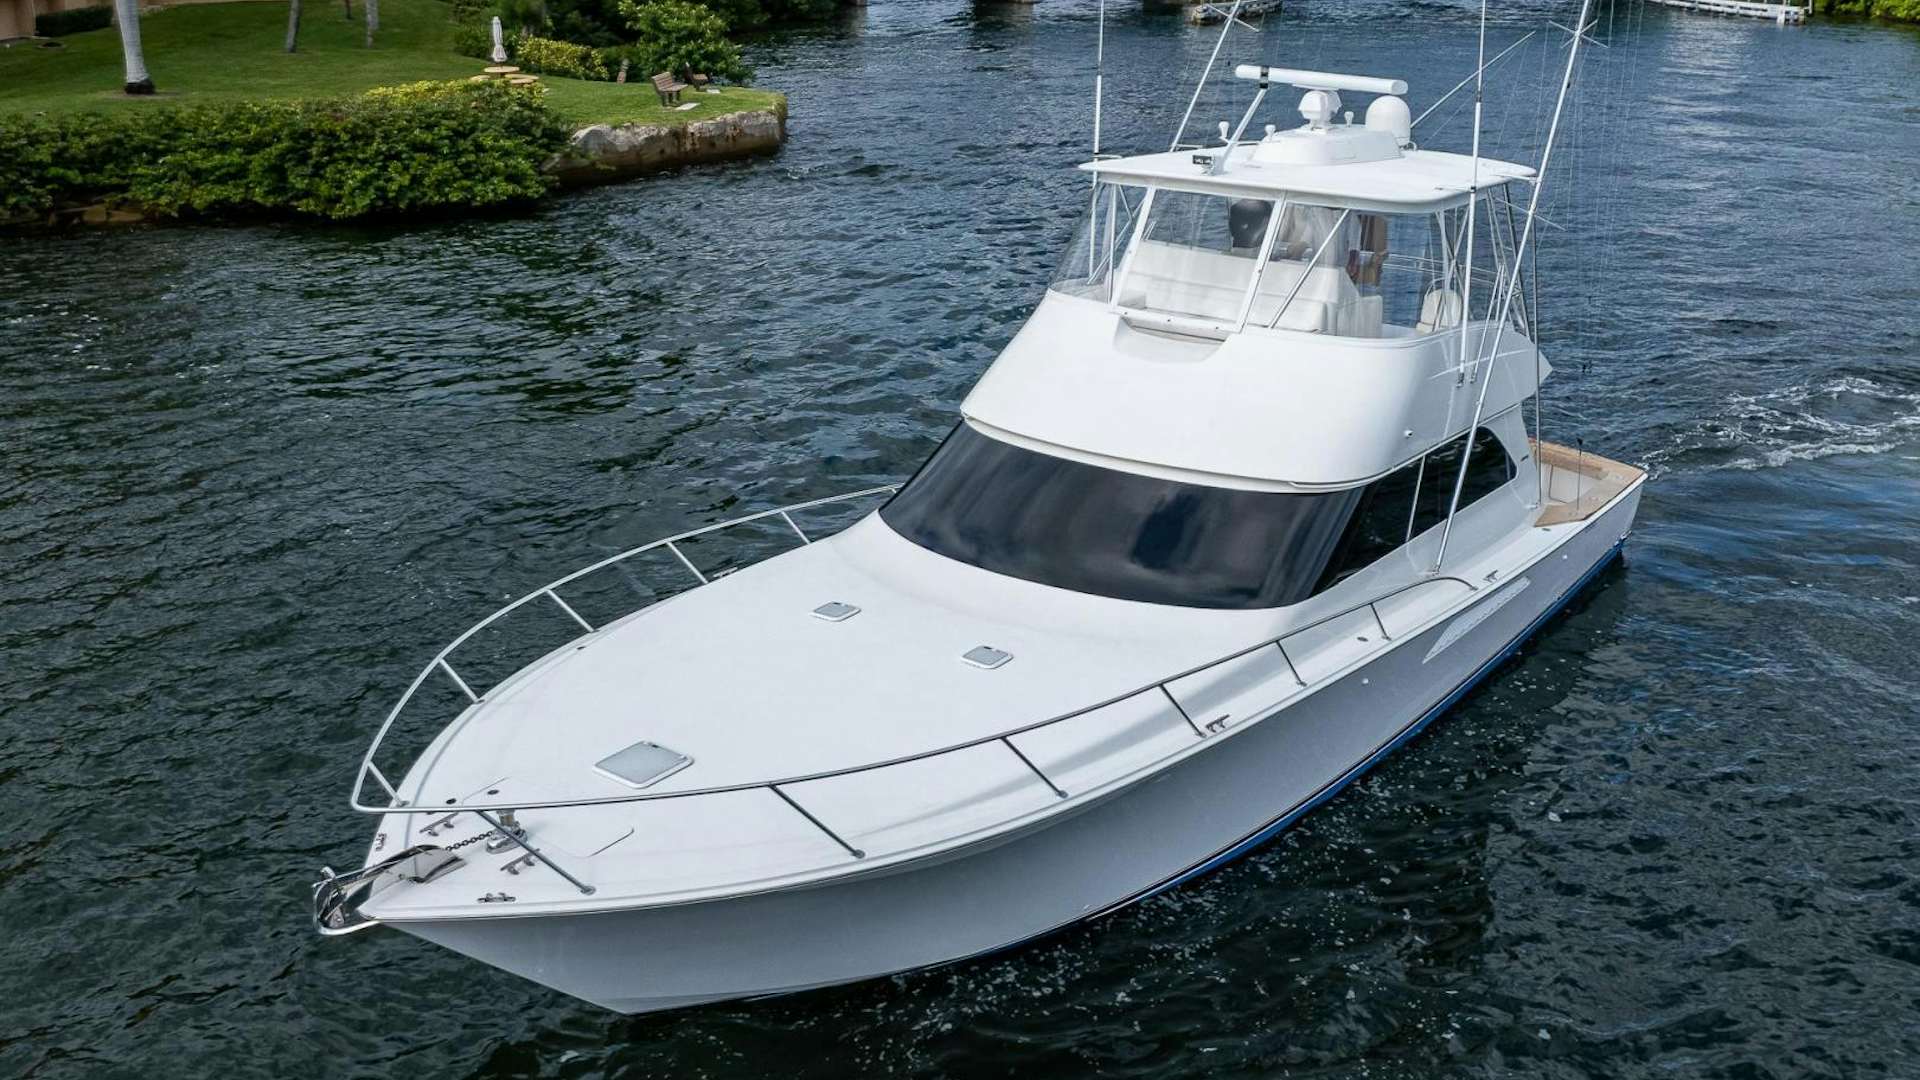 Off ice
Yacht for Sale